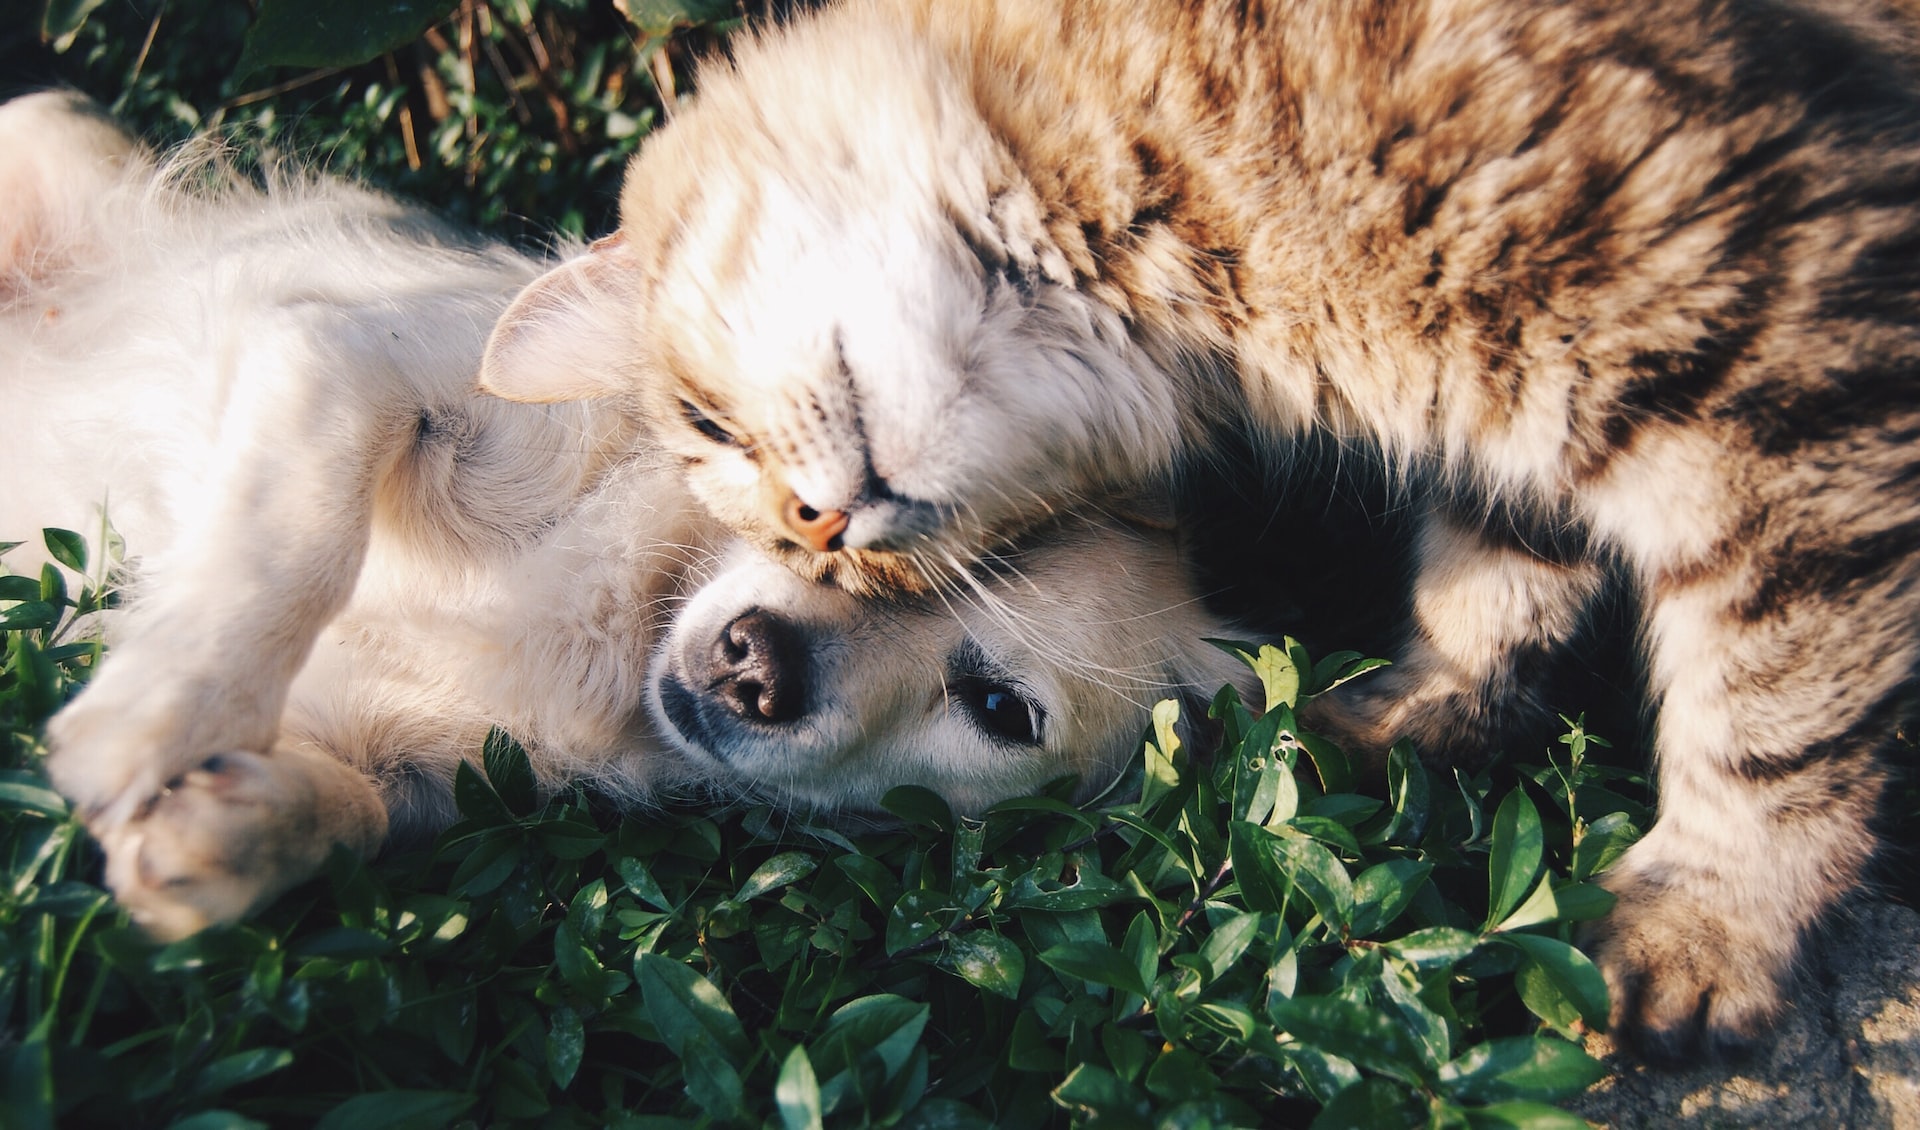 Pinterest for Pets: The Ultimate Platform for Pet Care Tips and Inspiration